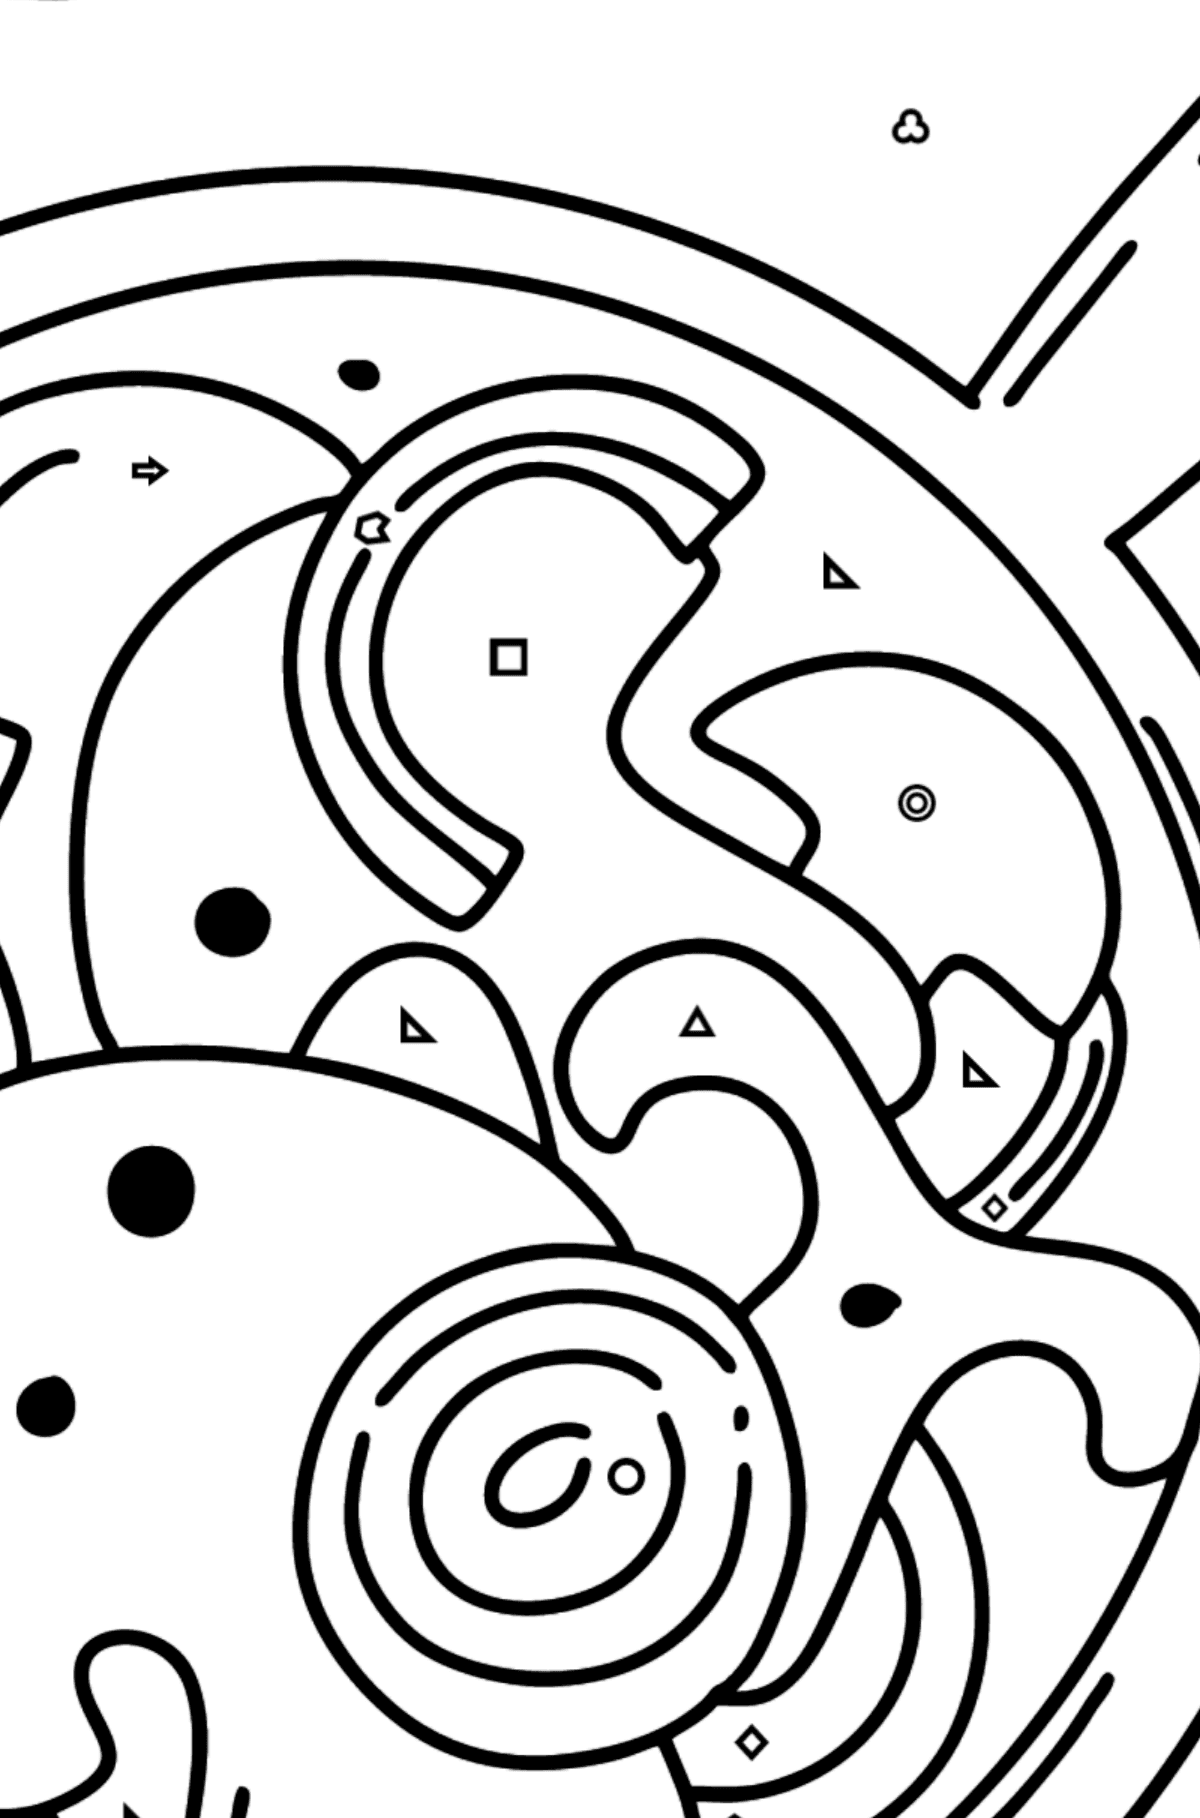 Mushrooms in Creamy Sauce coloring page - Coloring by Geometric Shapes for Kids